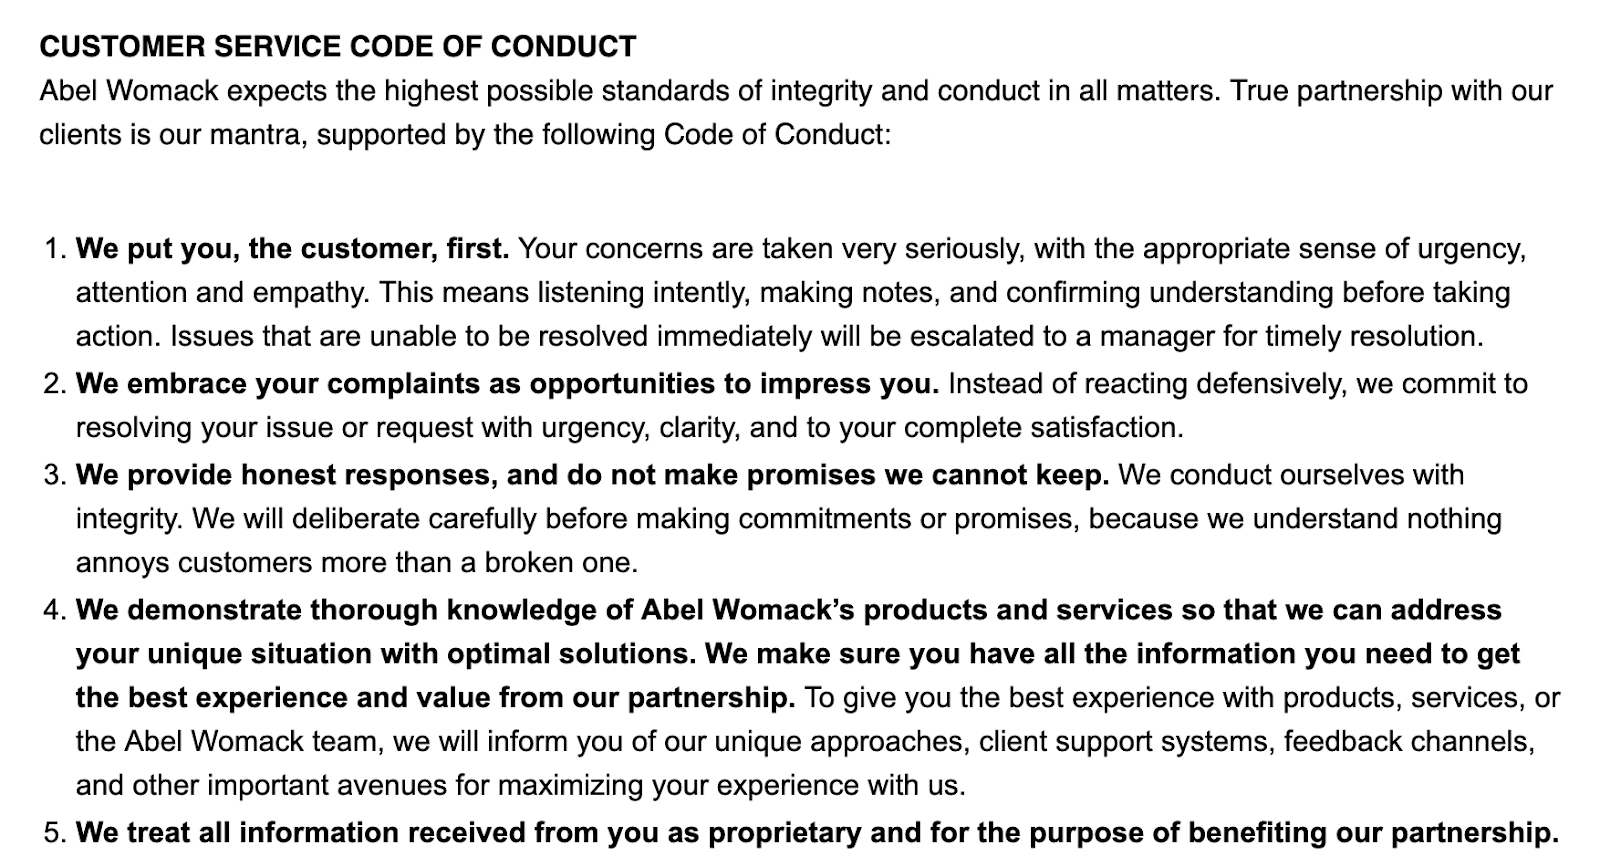 Abdel Womack's Code of Conduct Example